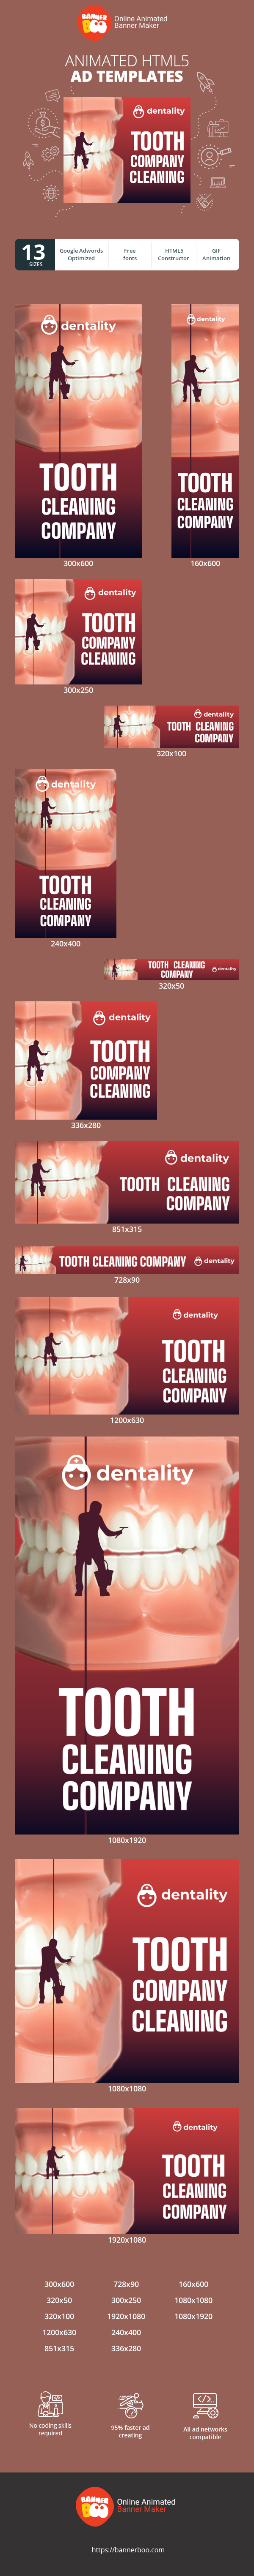 Banner ad template — Tooth Cleaning Company  — You Call We Clean